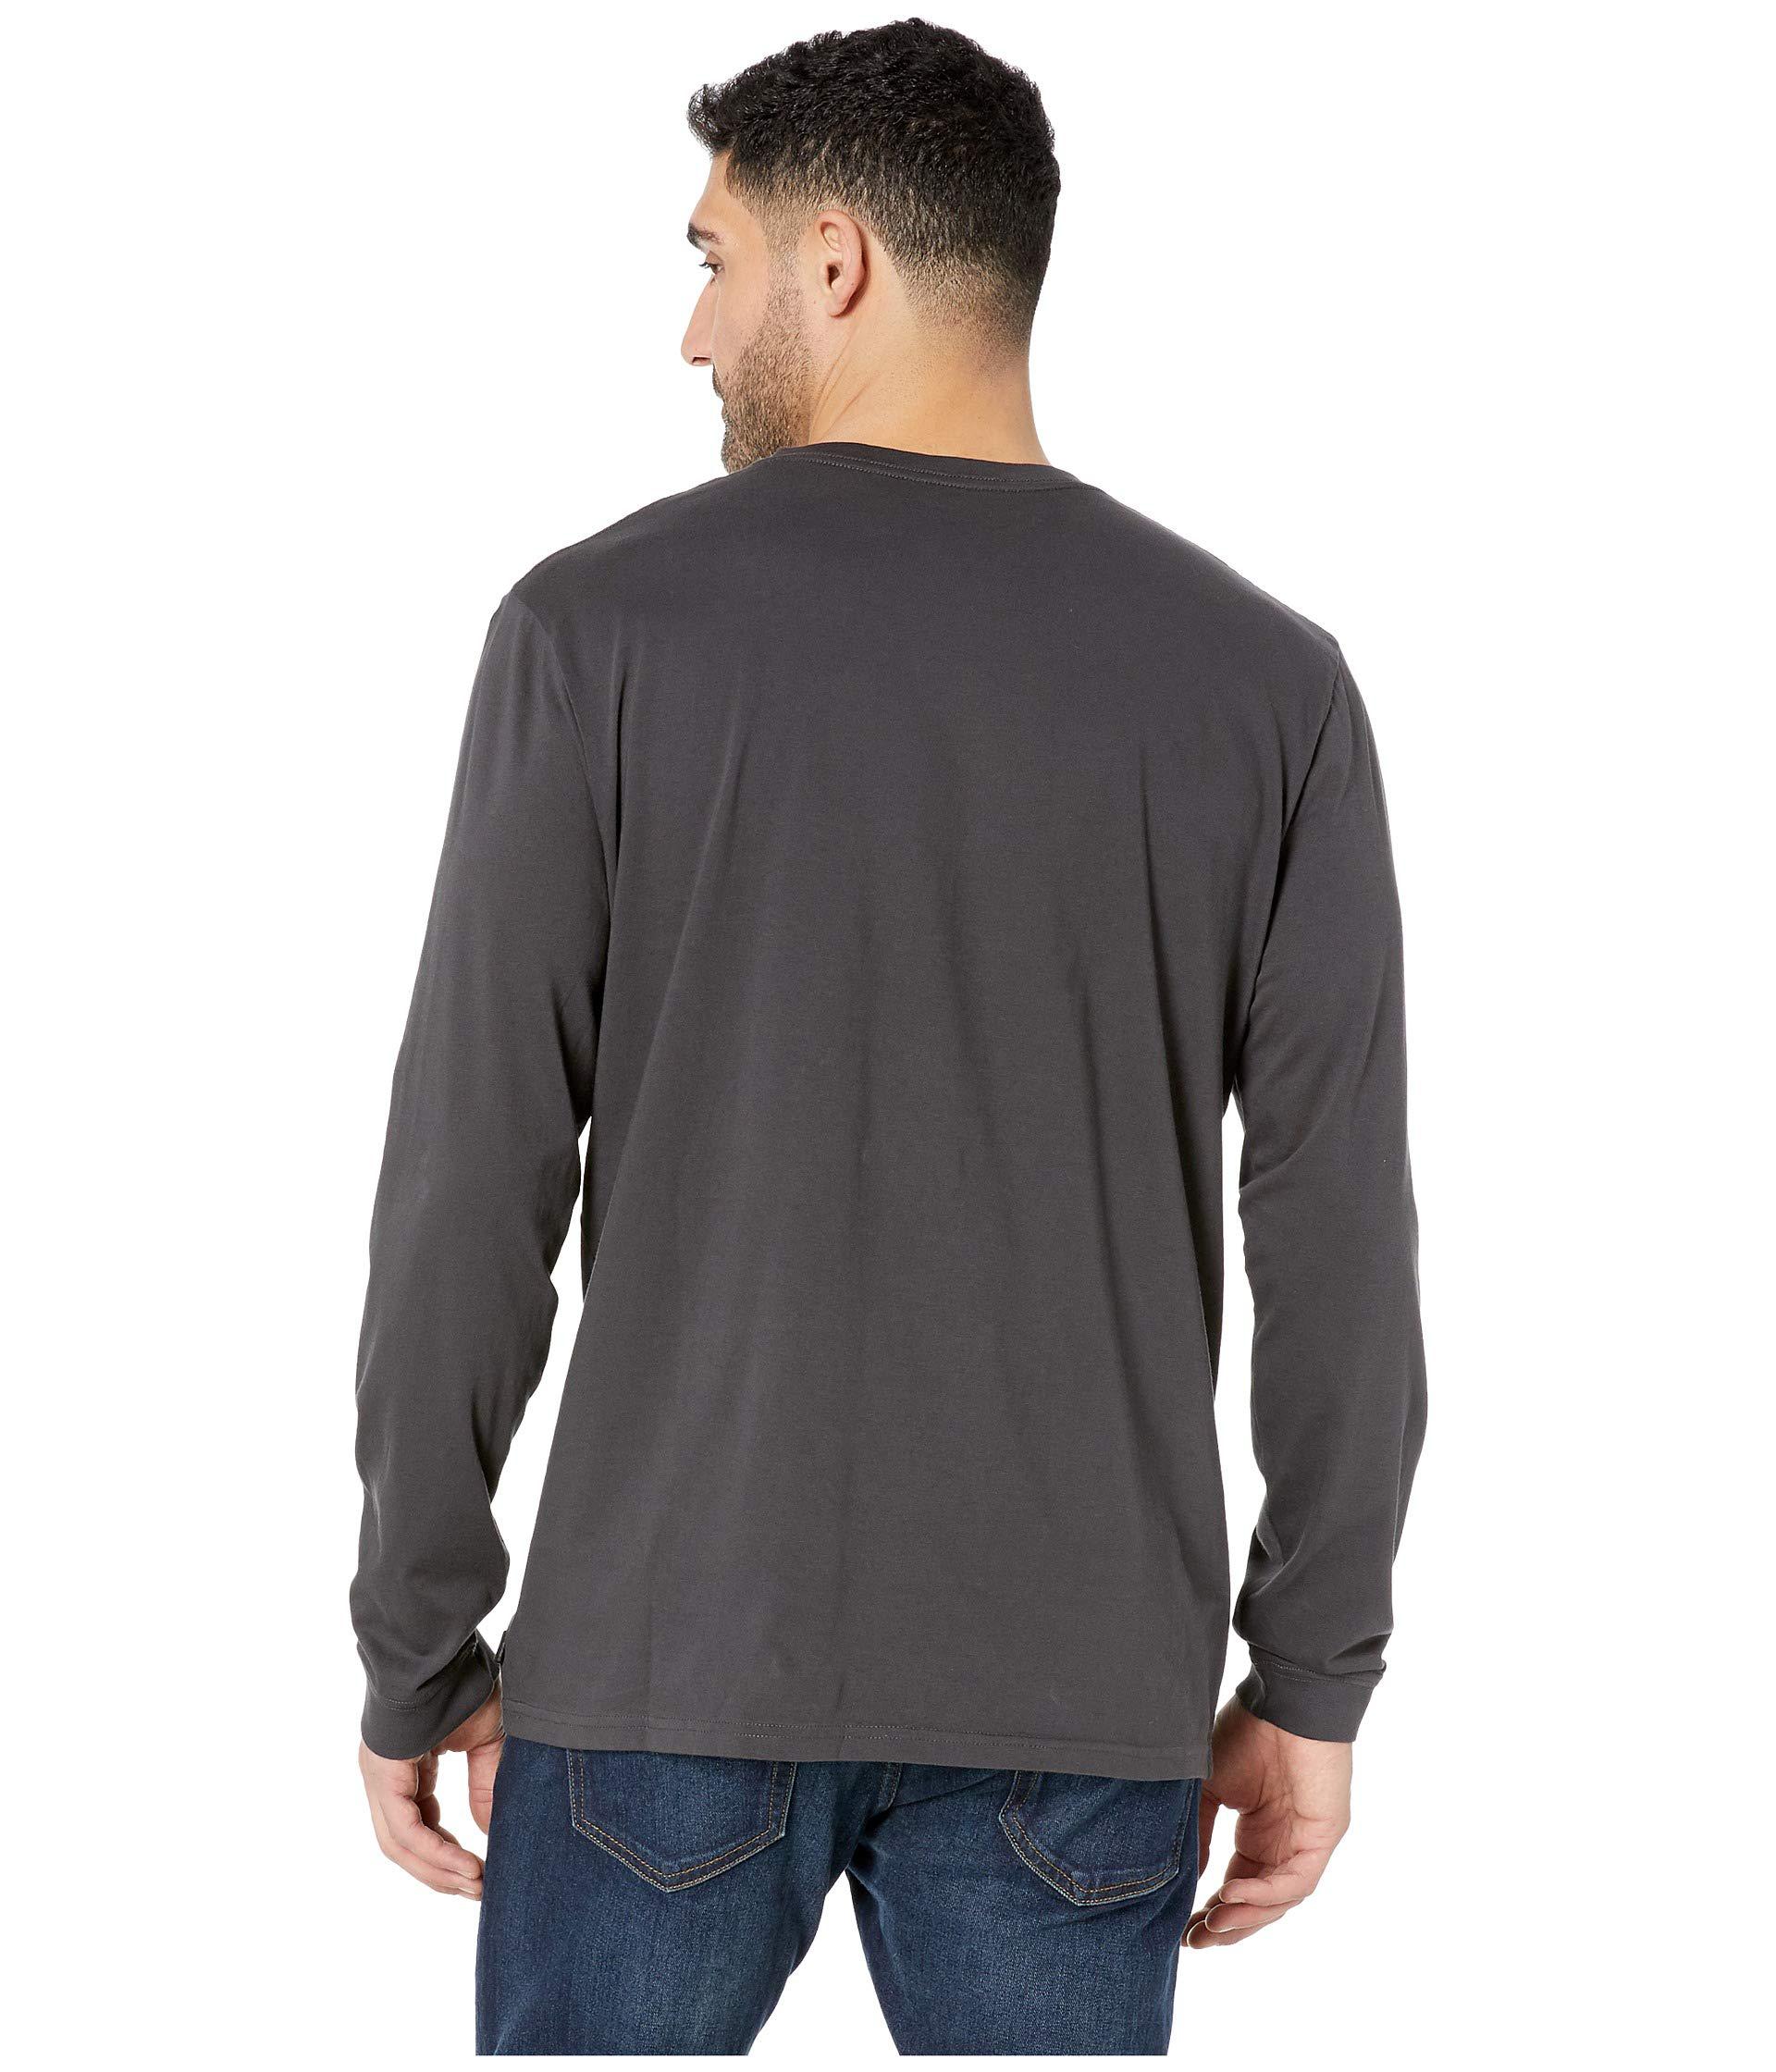 Cobama Mens Long-Sleeve Full-Zip Solid Slim Fit Knitwear Pullover Sweater